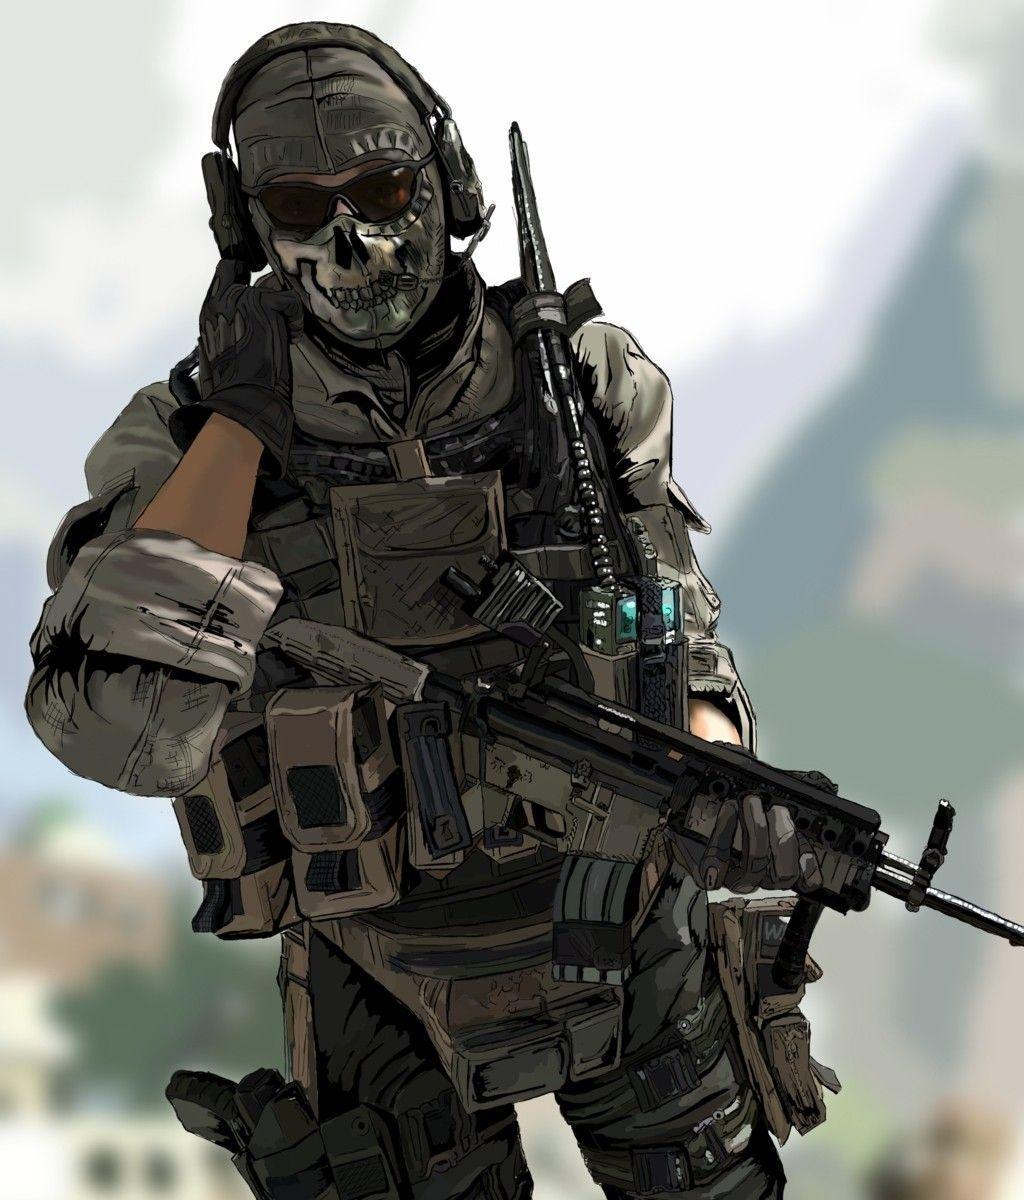 simon call of duty download free